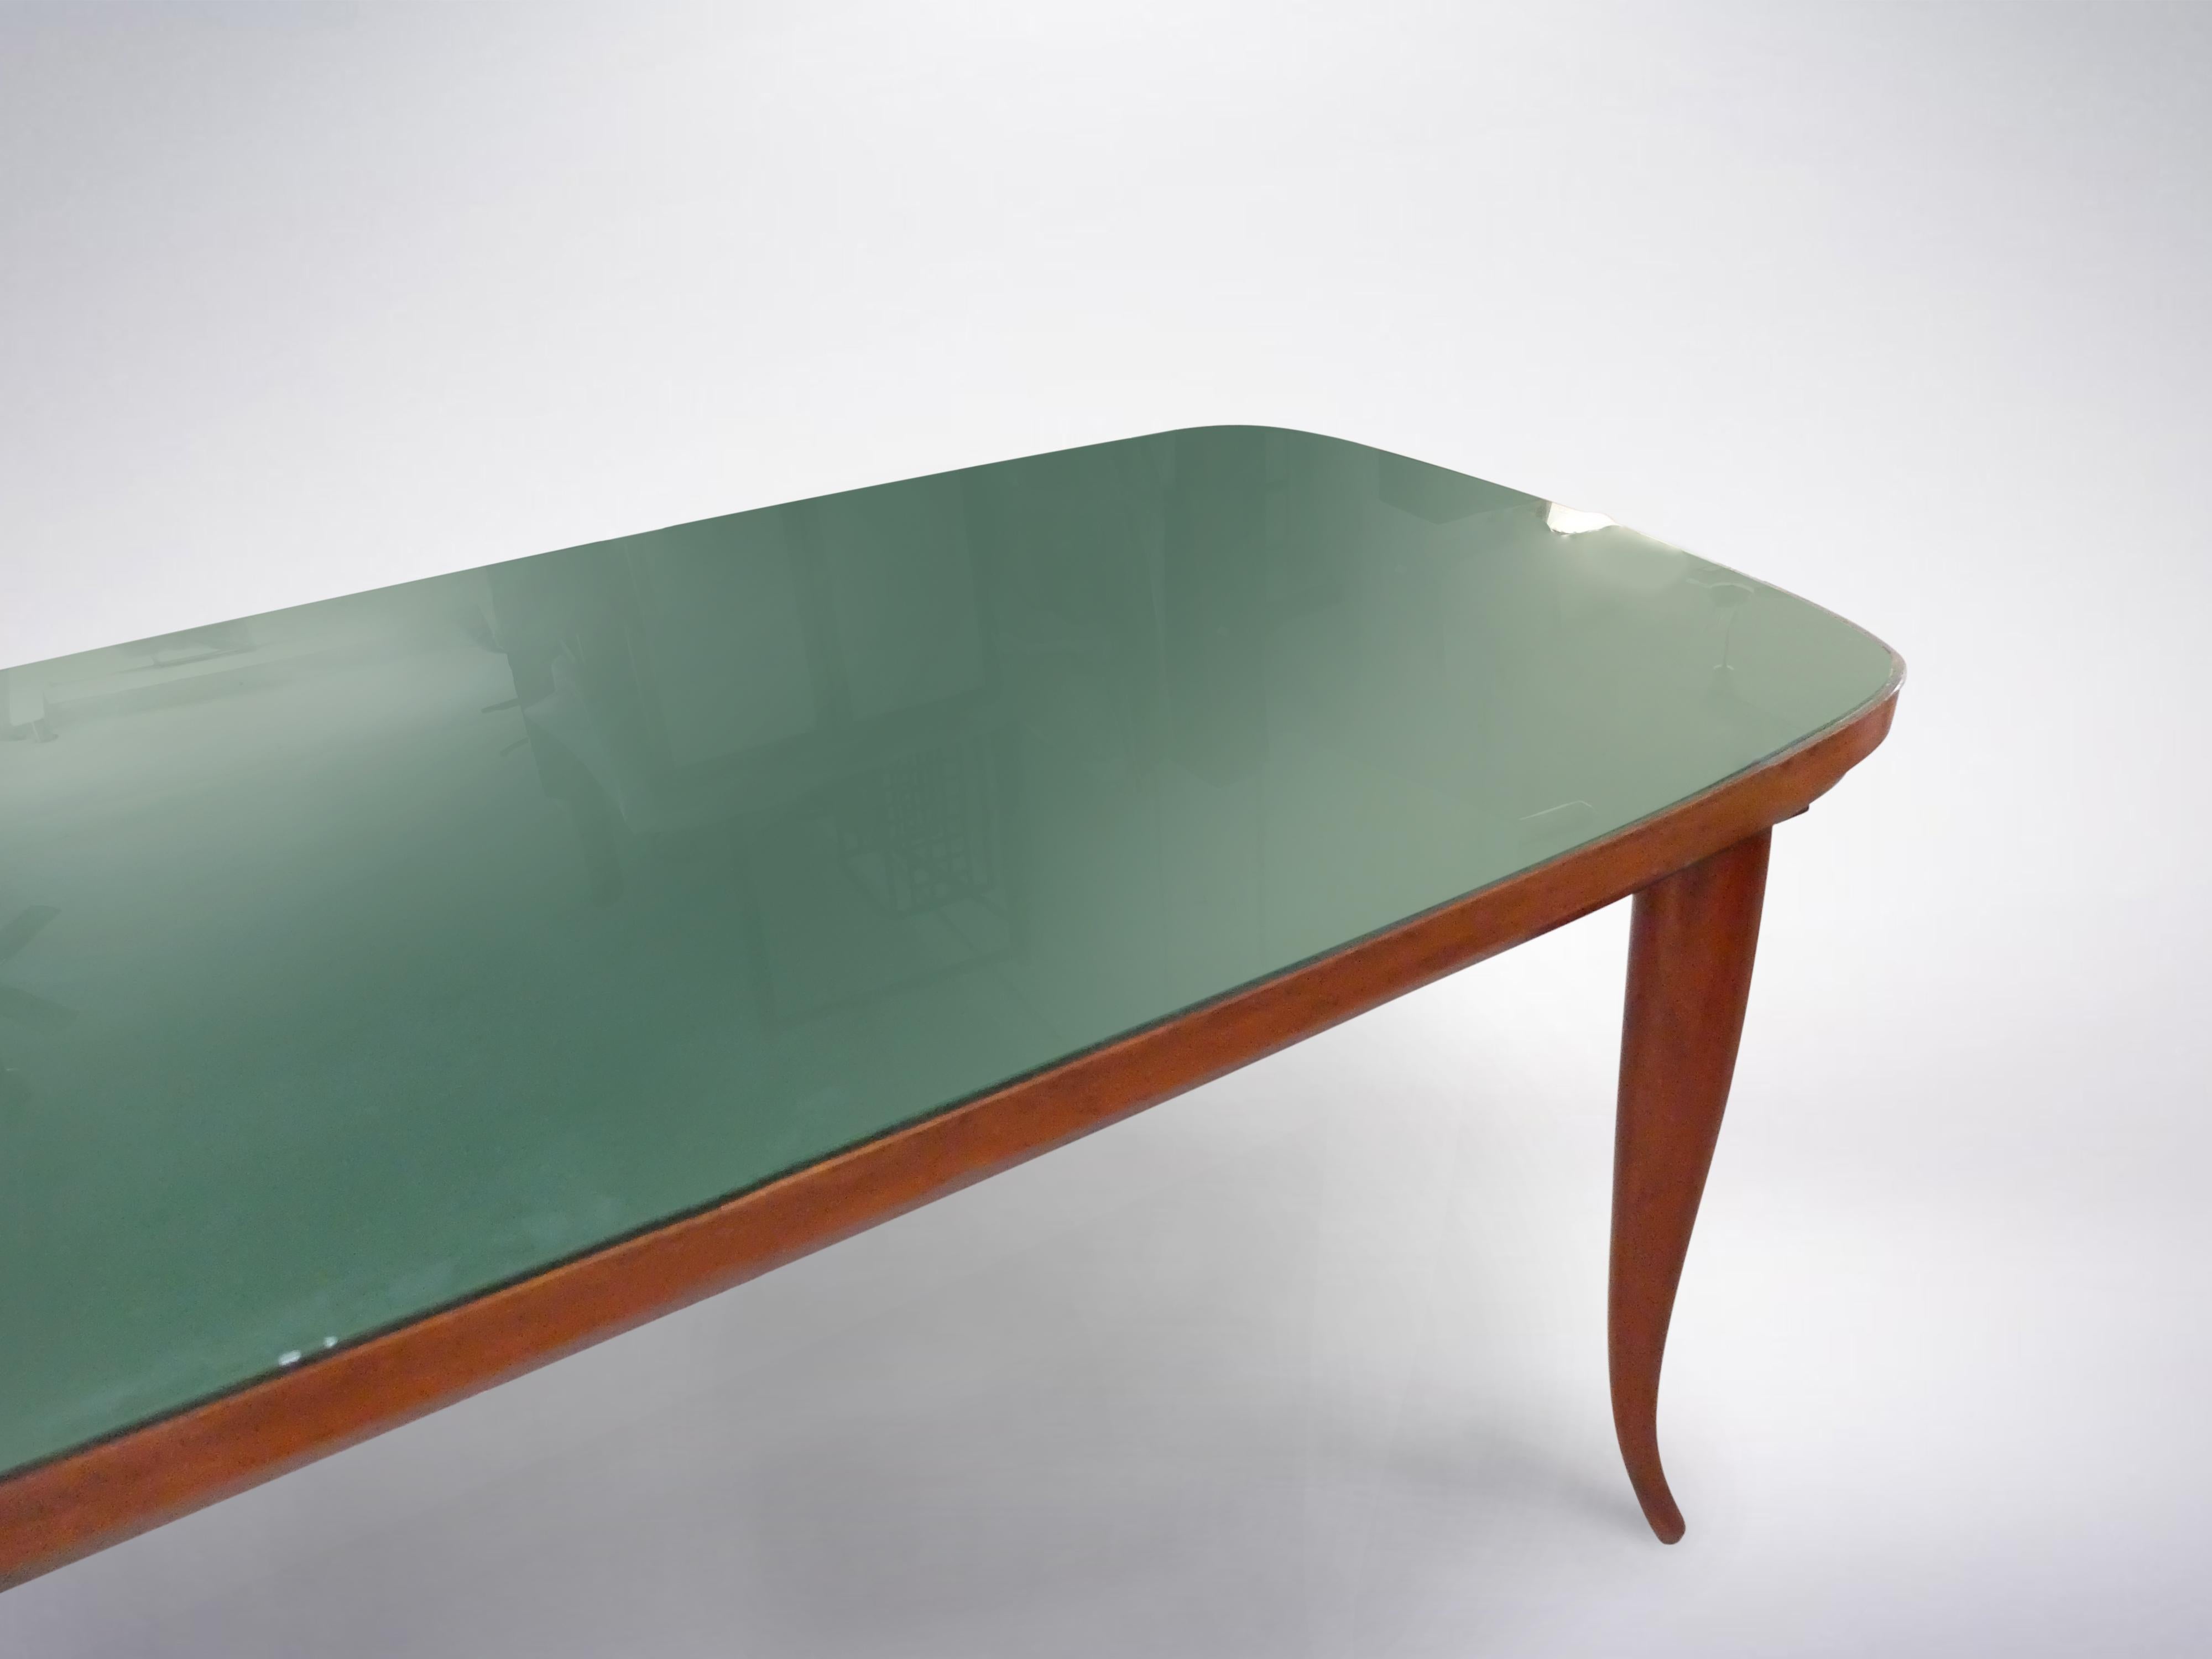 Italian Mid-Century Modern Wooden Dining Table with Green Glass Top, circa 1950 In Good Condition For Sale In Milan, IT